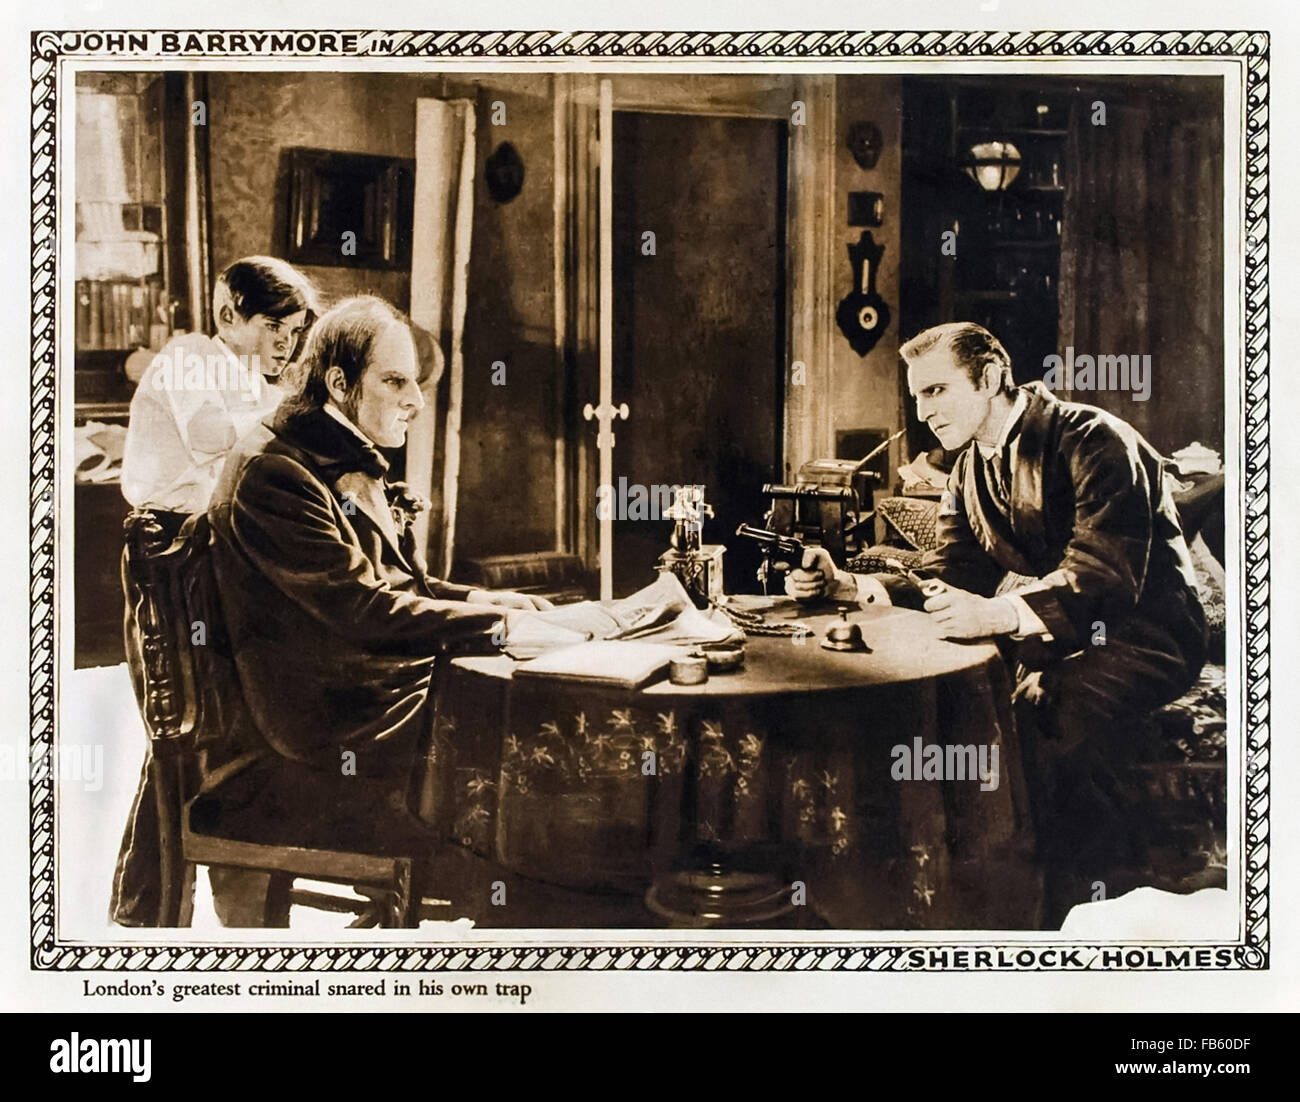 'London's greatest criminal snared in his own trap' Lobby card showing John Barrymore playing Sherlock Holmes and Gustav von Seyffertitz as Prof. Moriarty in the 1922 silent film 'Sherlock Holmes' (UK title 'Moriarty') directed by Albert Parker. Stock Photo